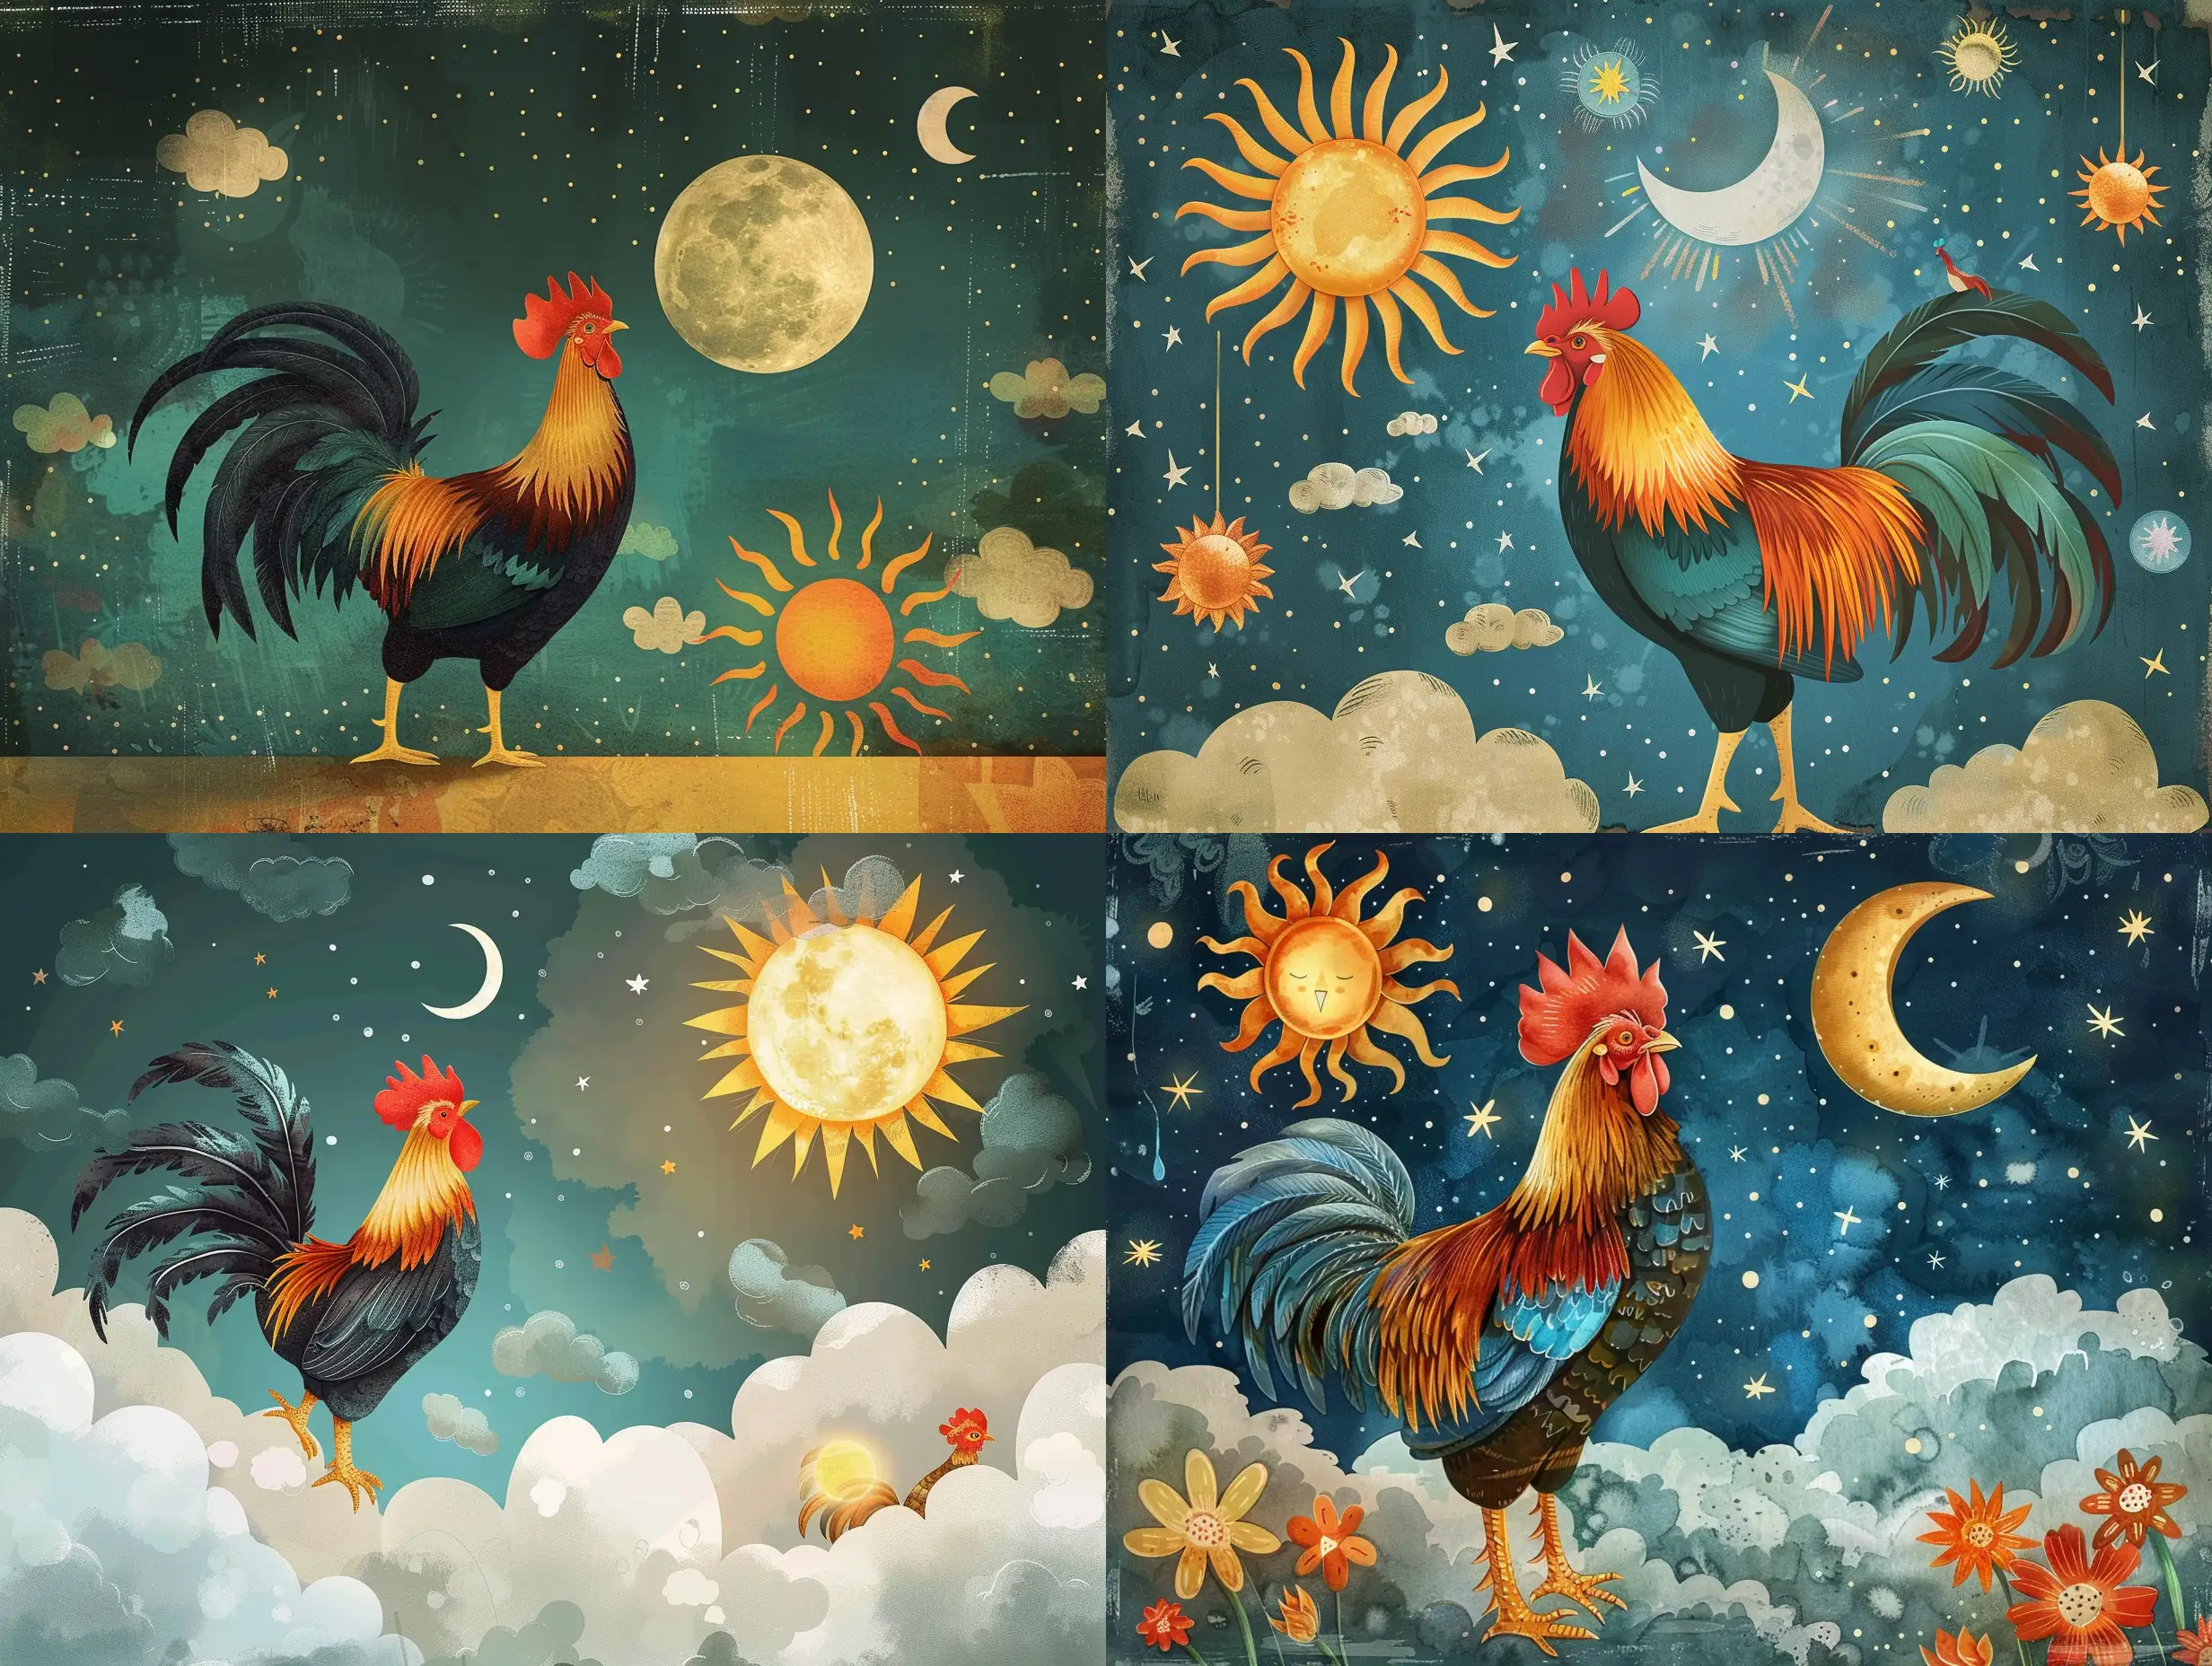 Enchanting-Fairytale-Illustration-Rooster-Moon-and-Sun-in-the-Sky